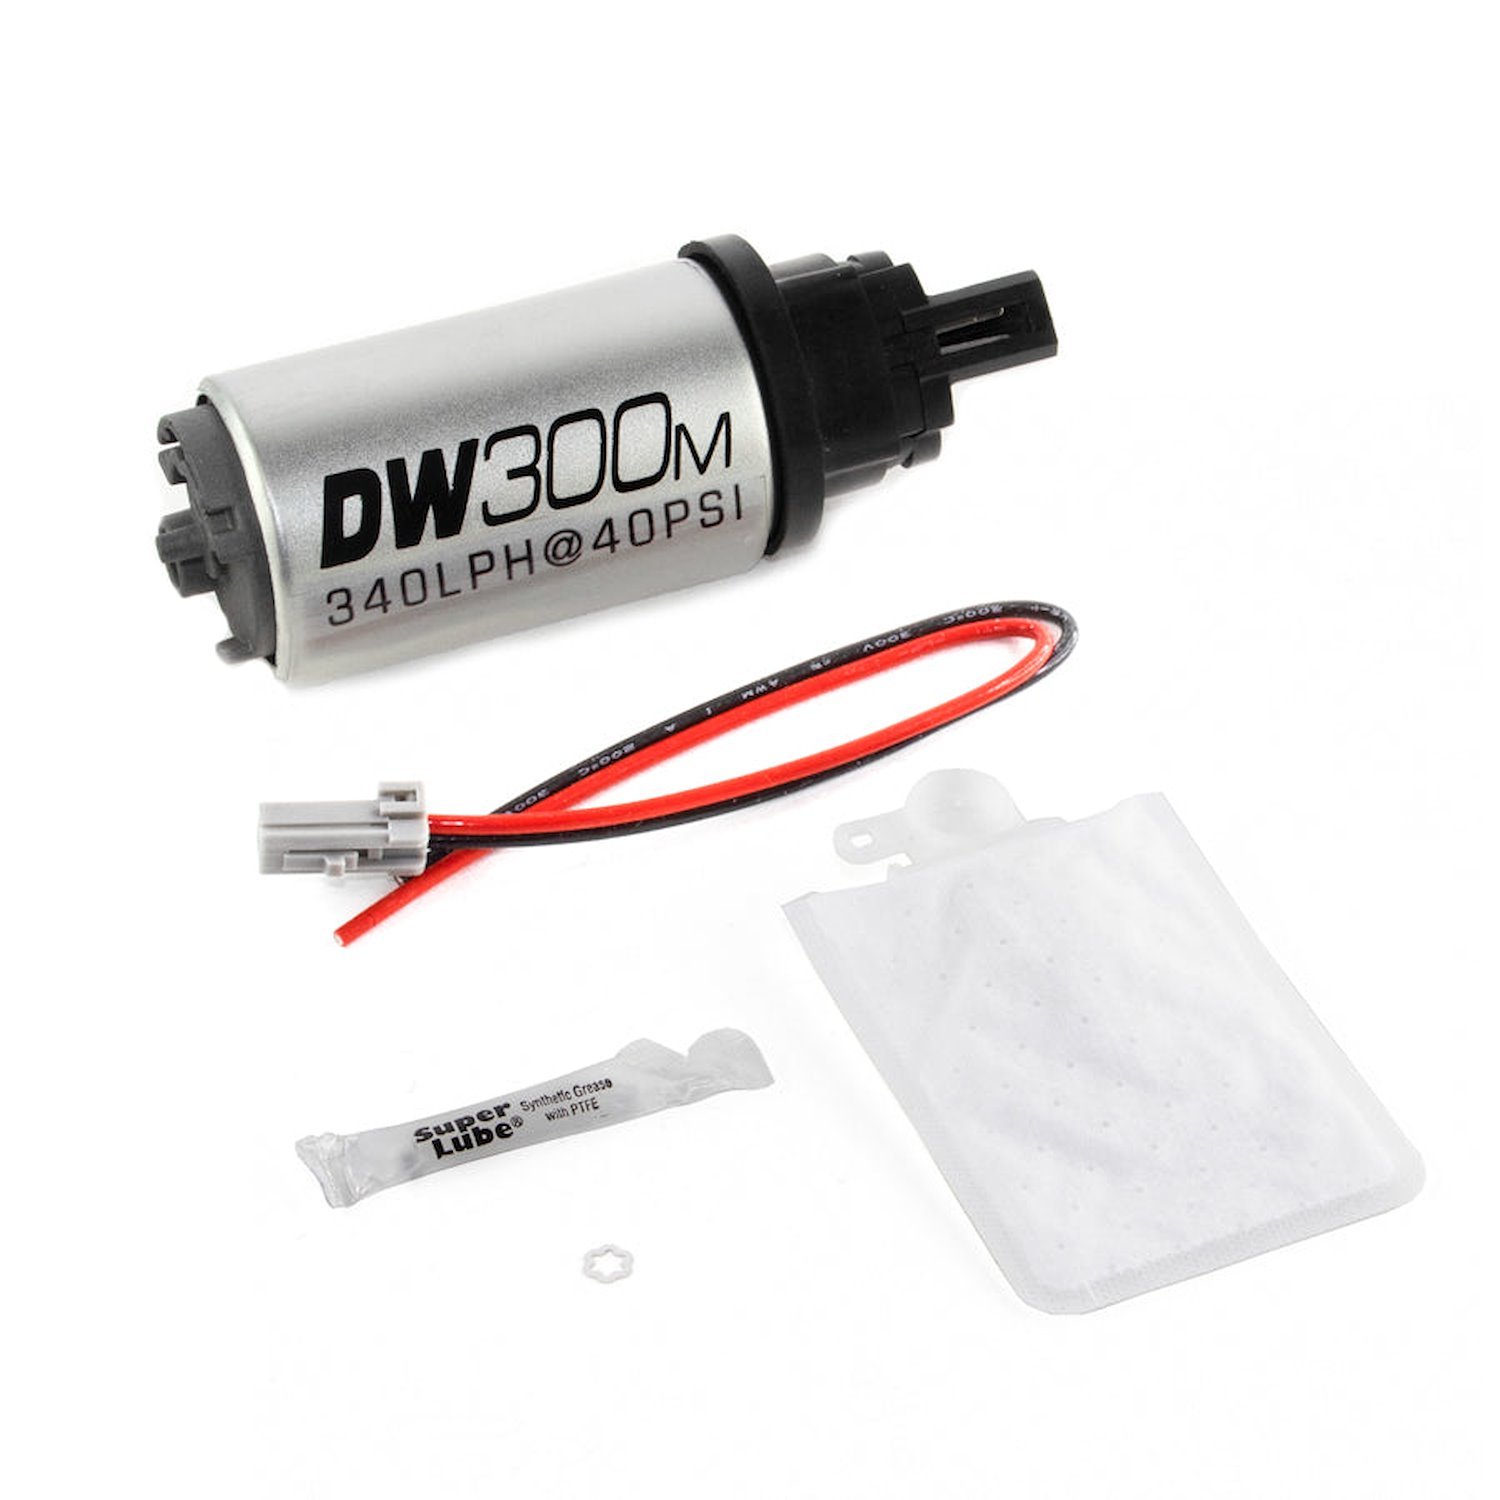 93051032 DW300M series 340lph Ford in-tank fuel pump w/ install kit for 99-04 Mustang V6/V8 (exc SC)